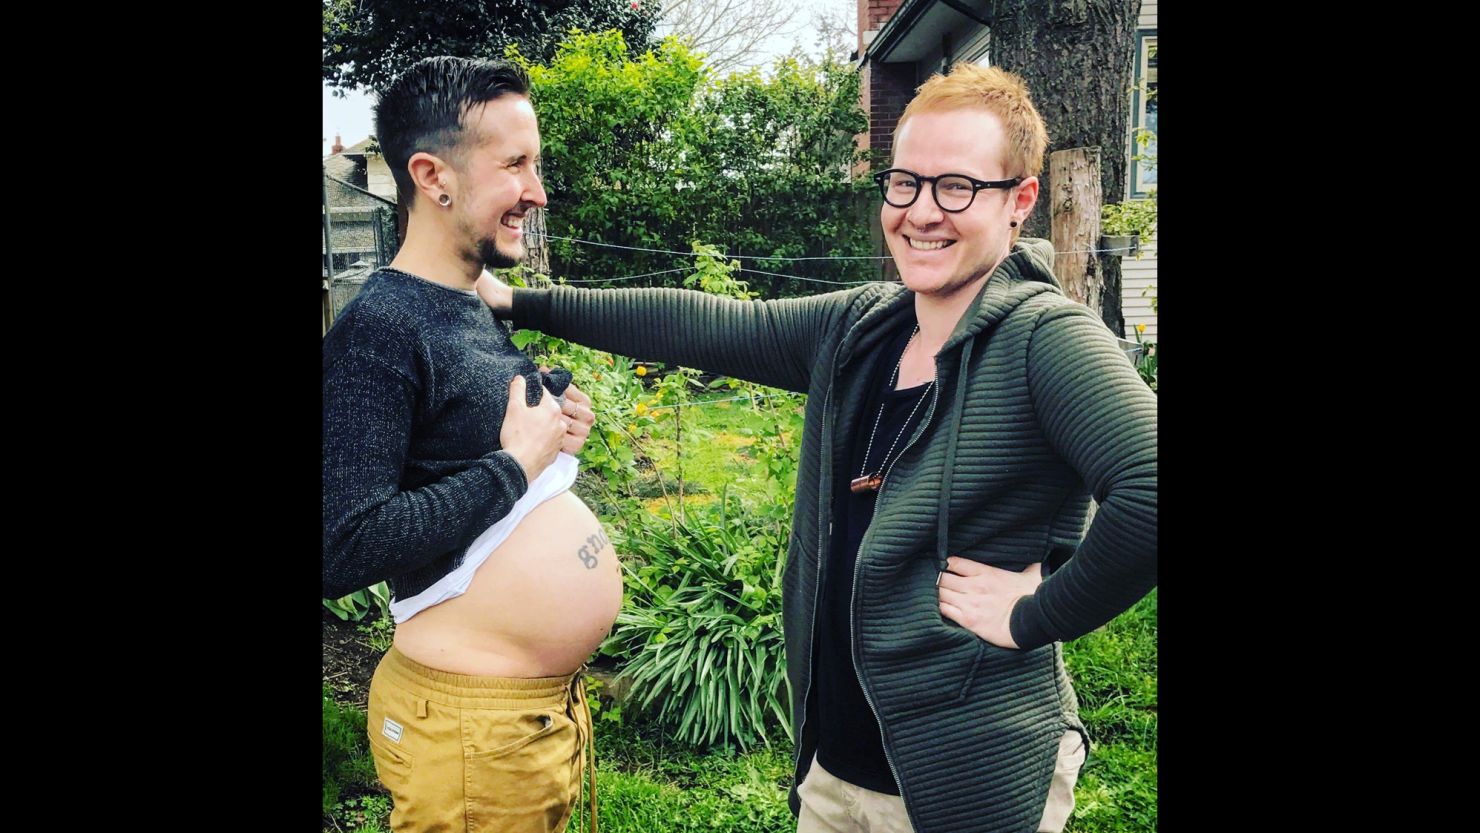 Trystan Reese is a trans man who is expecting a baby with his partner of seven years, Biff Chaplow.